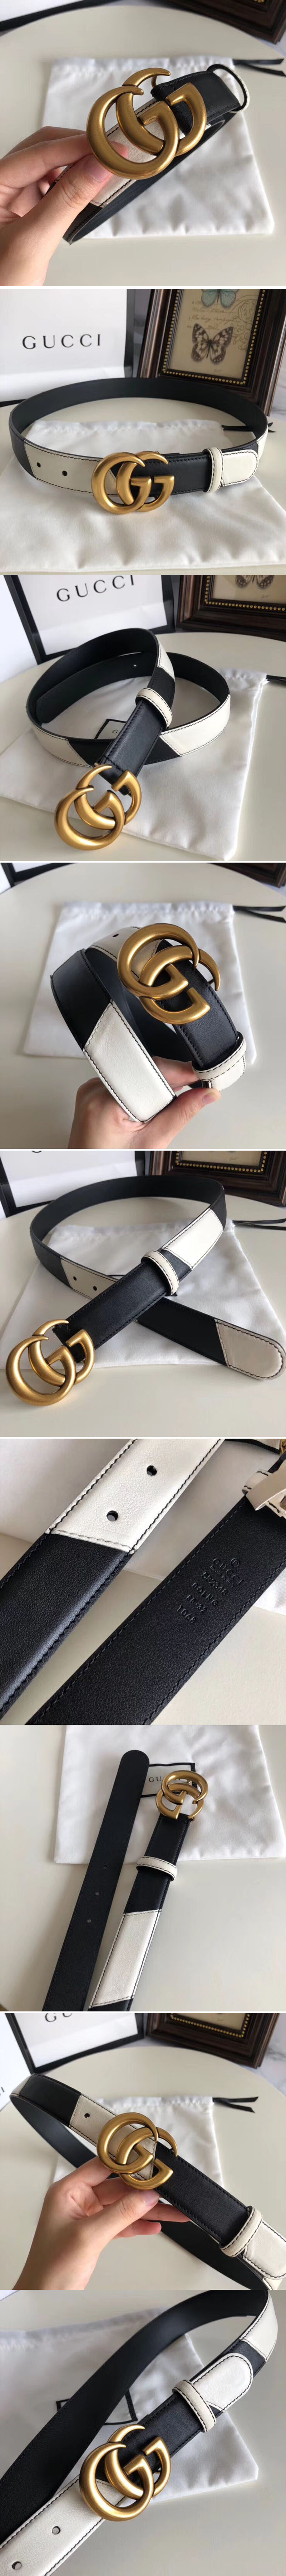 Replica Gucci 582348 30cm Leather belt with Double G buckle Black and White Leather